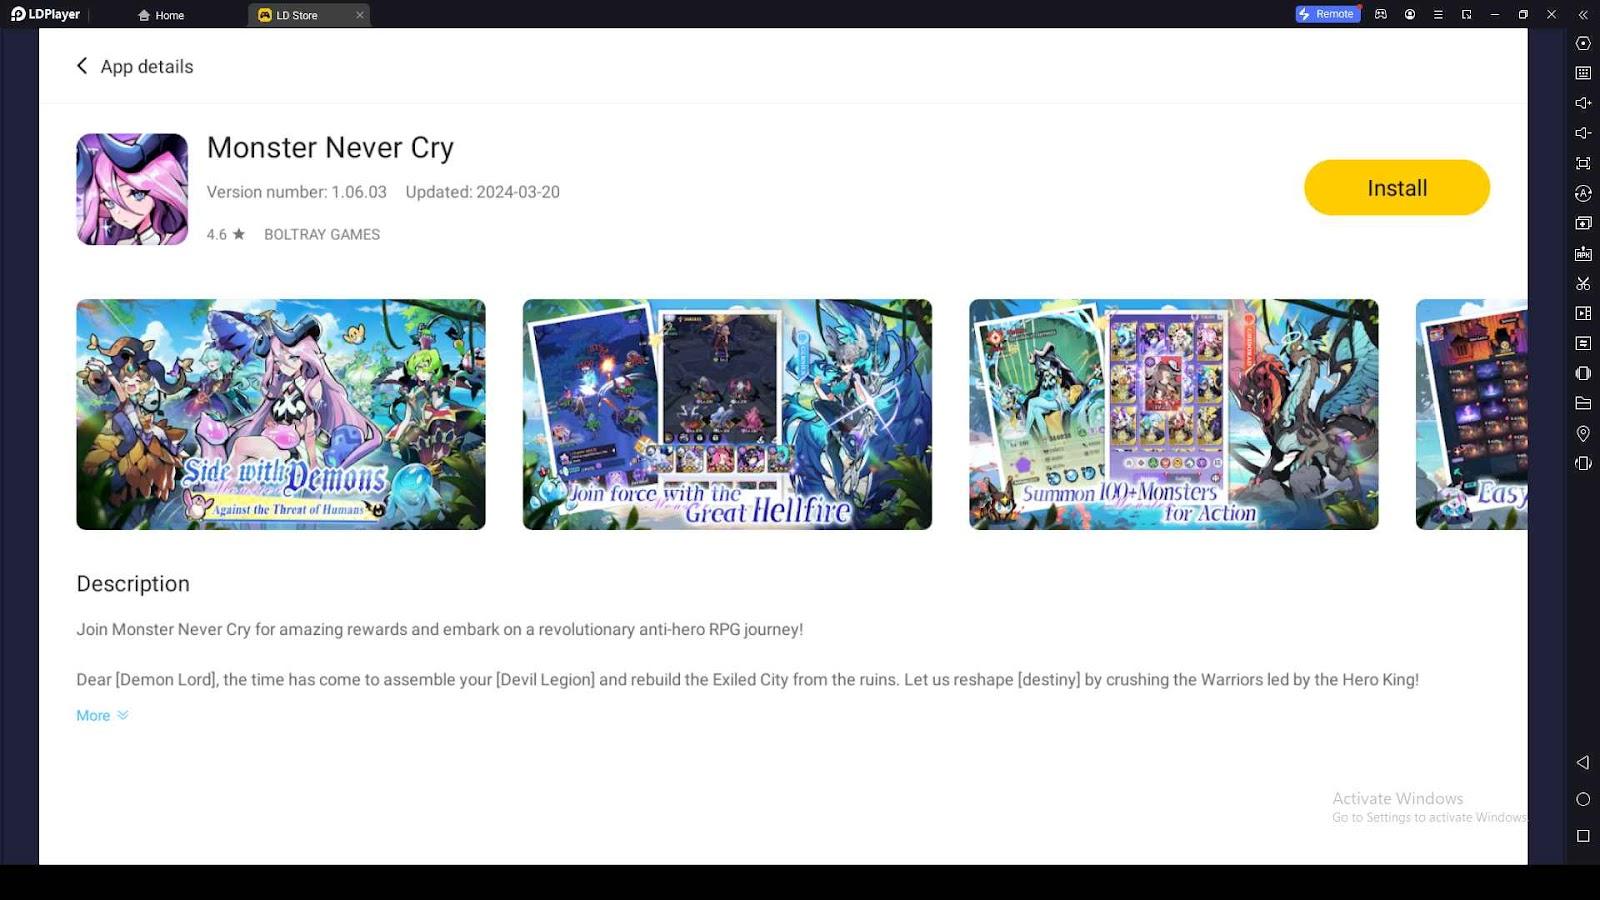 How to Perform a Monster Never Cry Reroll with LDPlayer 9?